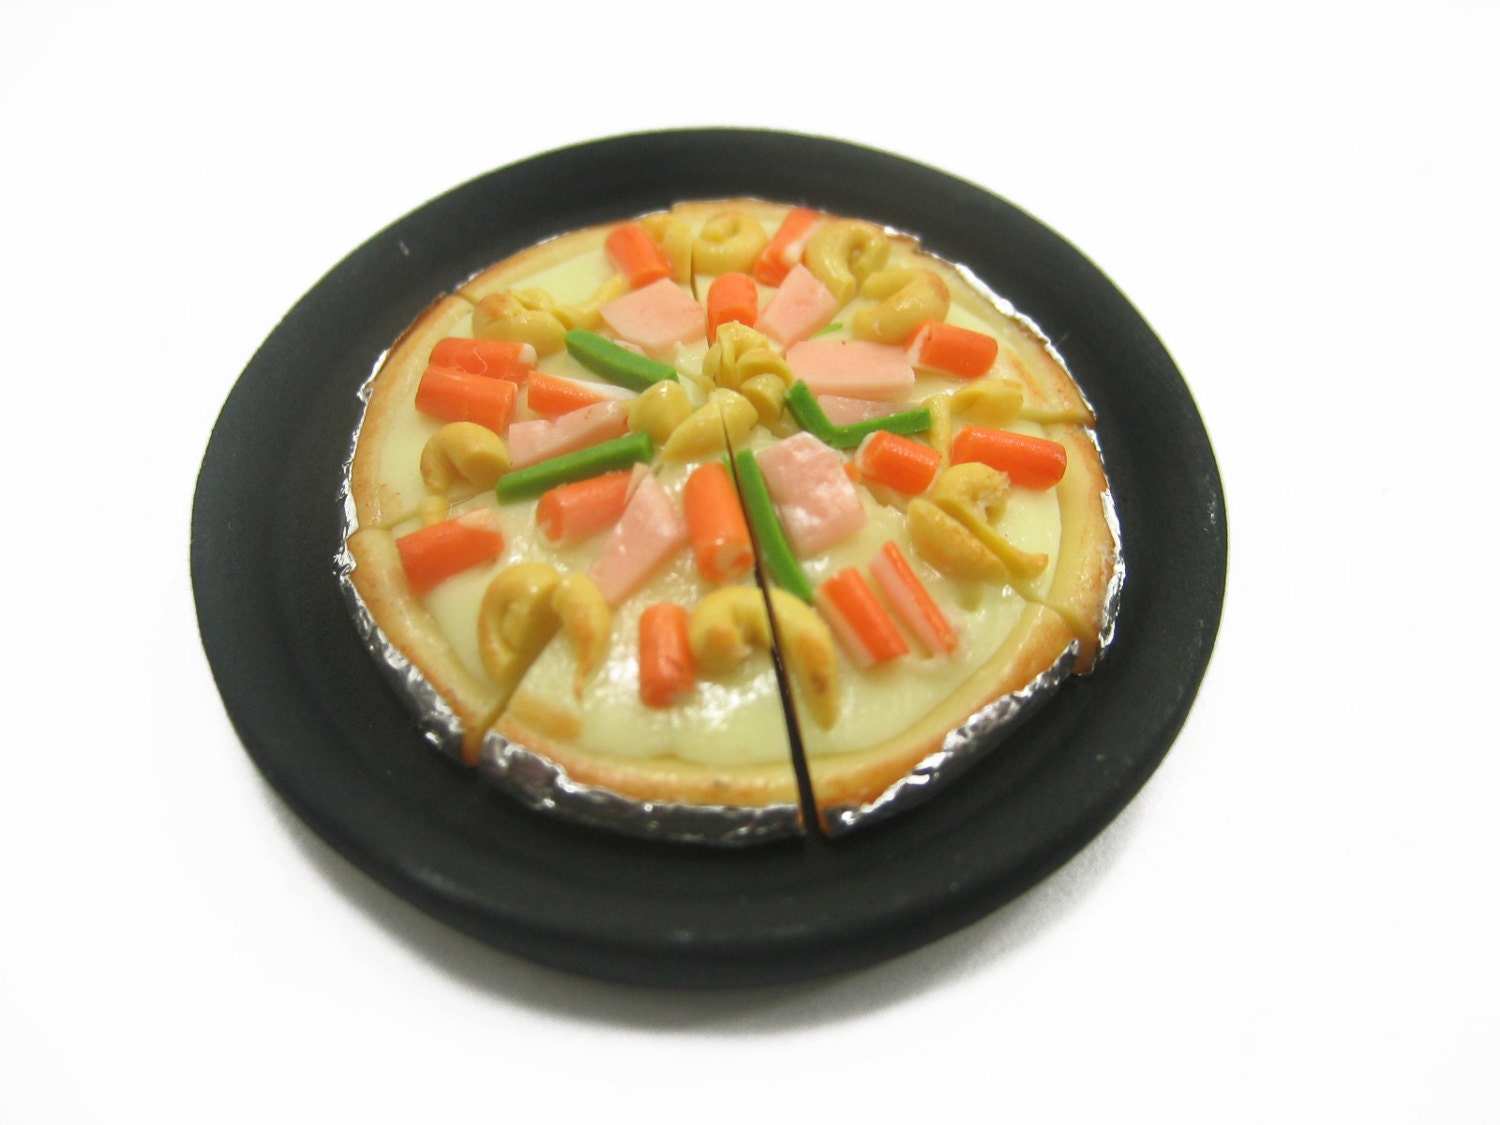 Dolls House Miniatures Food 8 Cuts Seafood Delight On Pizza Hot Pan Supply Charms Deco - 10978